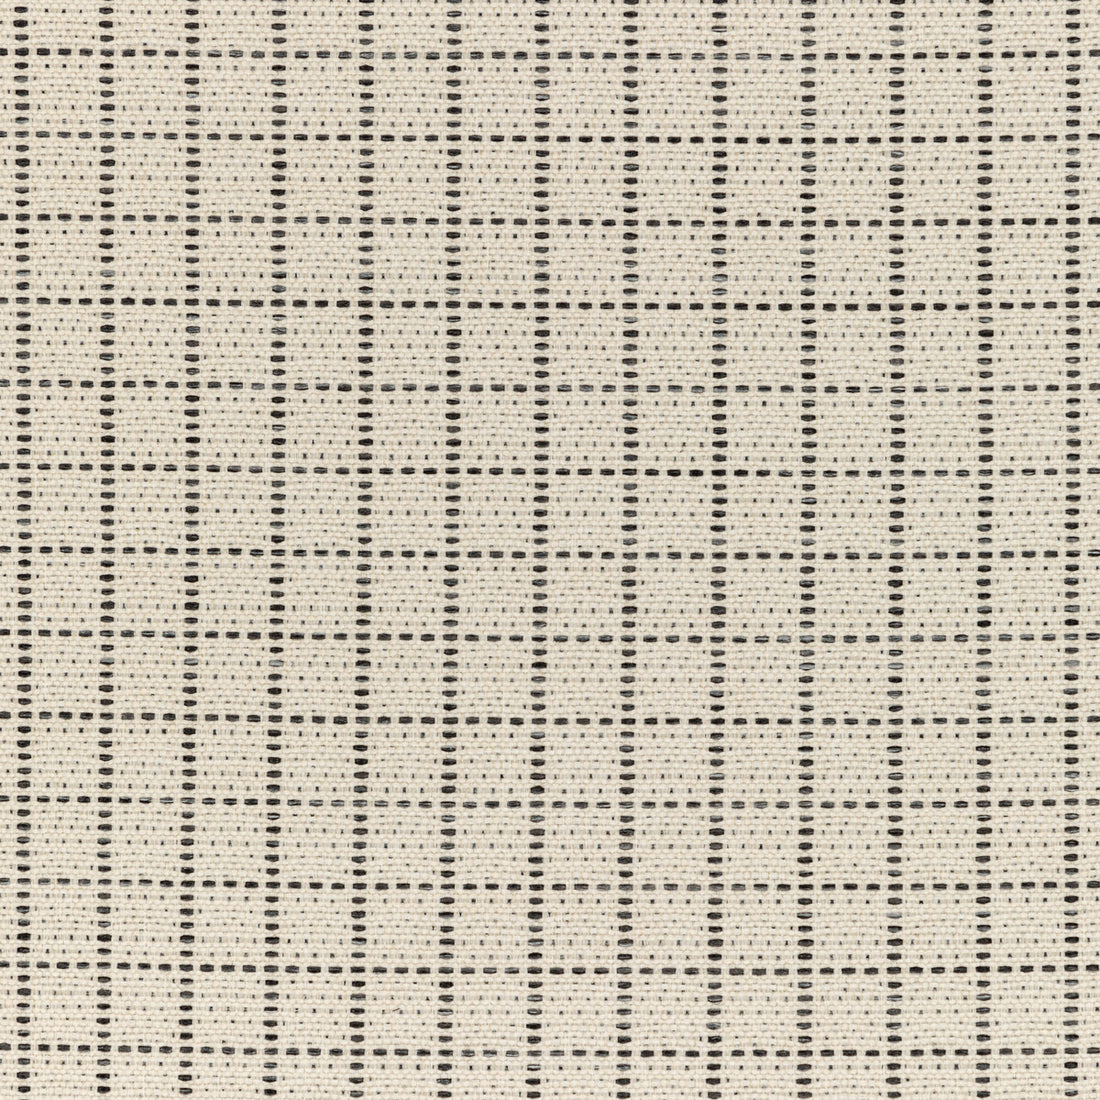 Kravet Smart fabric in 36304-81 color - pattern 36304.81.0 - by Kravet Smart in the Performance Crypton Home collection